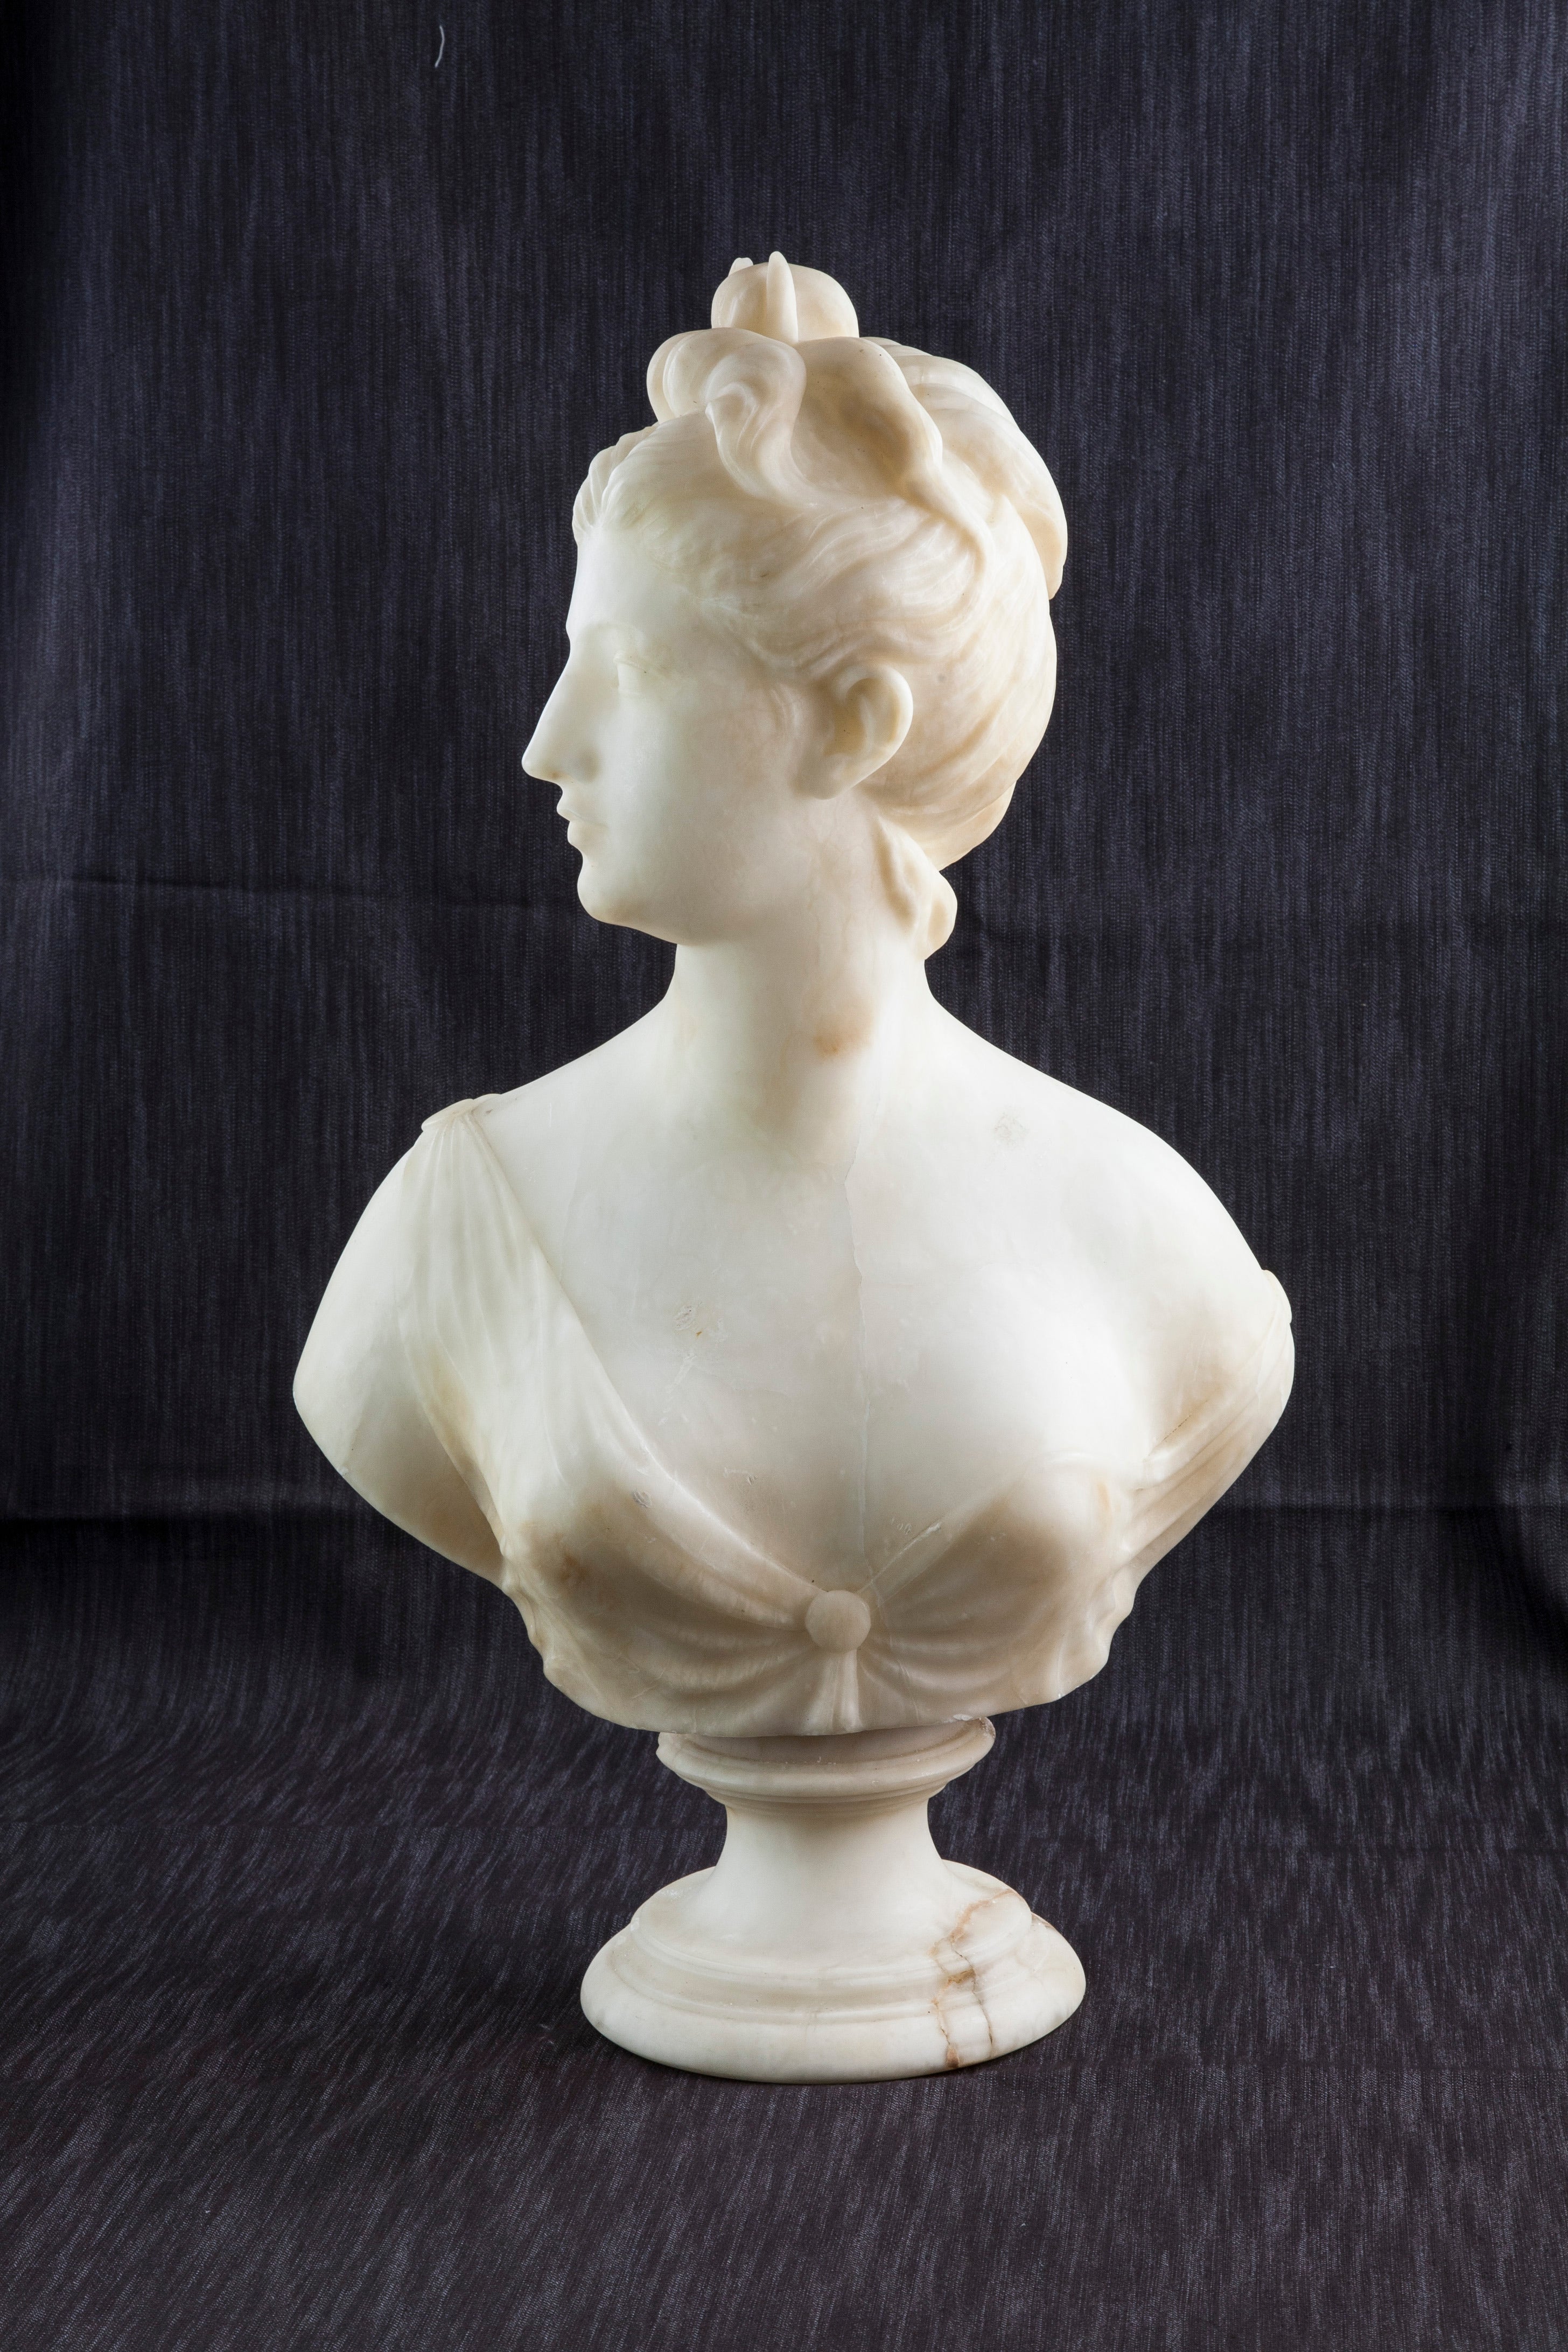 19th Century Solid Marble Bust of Diana, Goddess of the Hunt